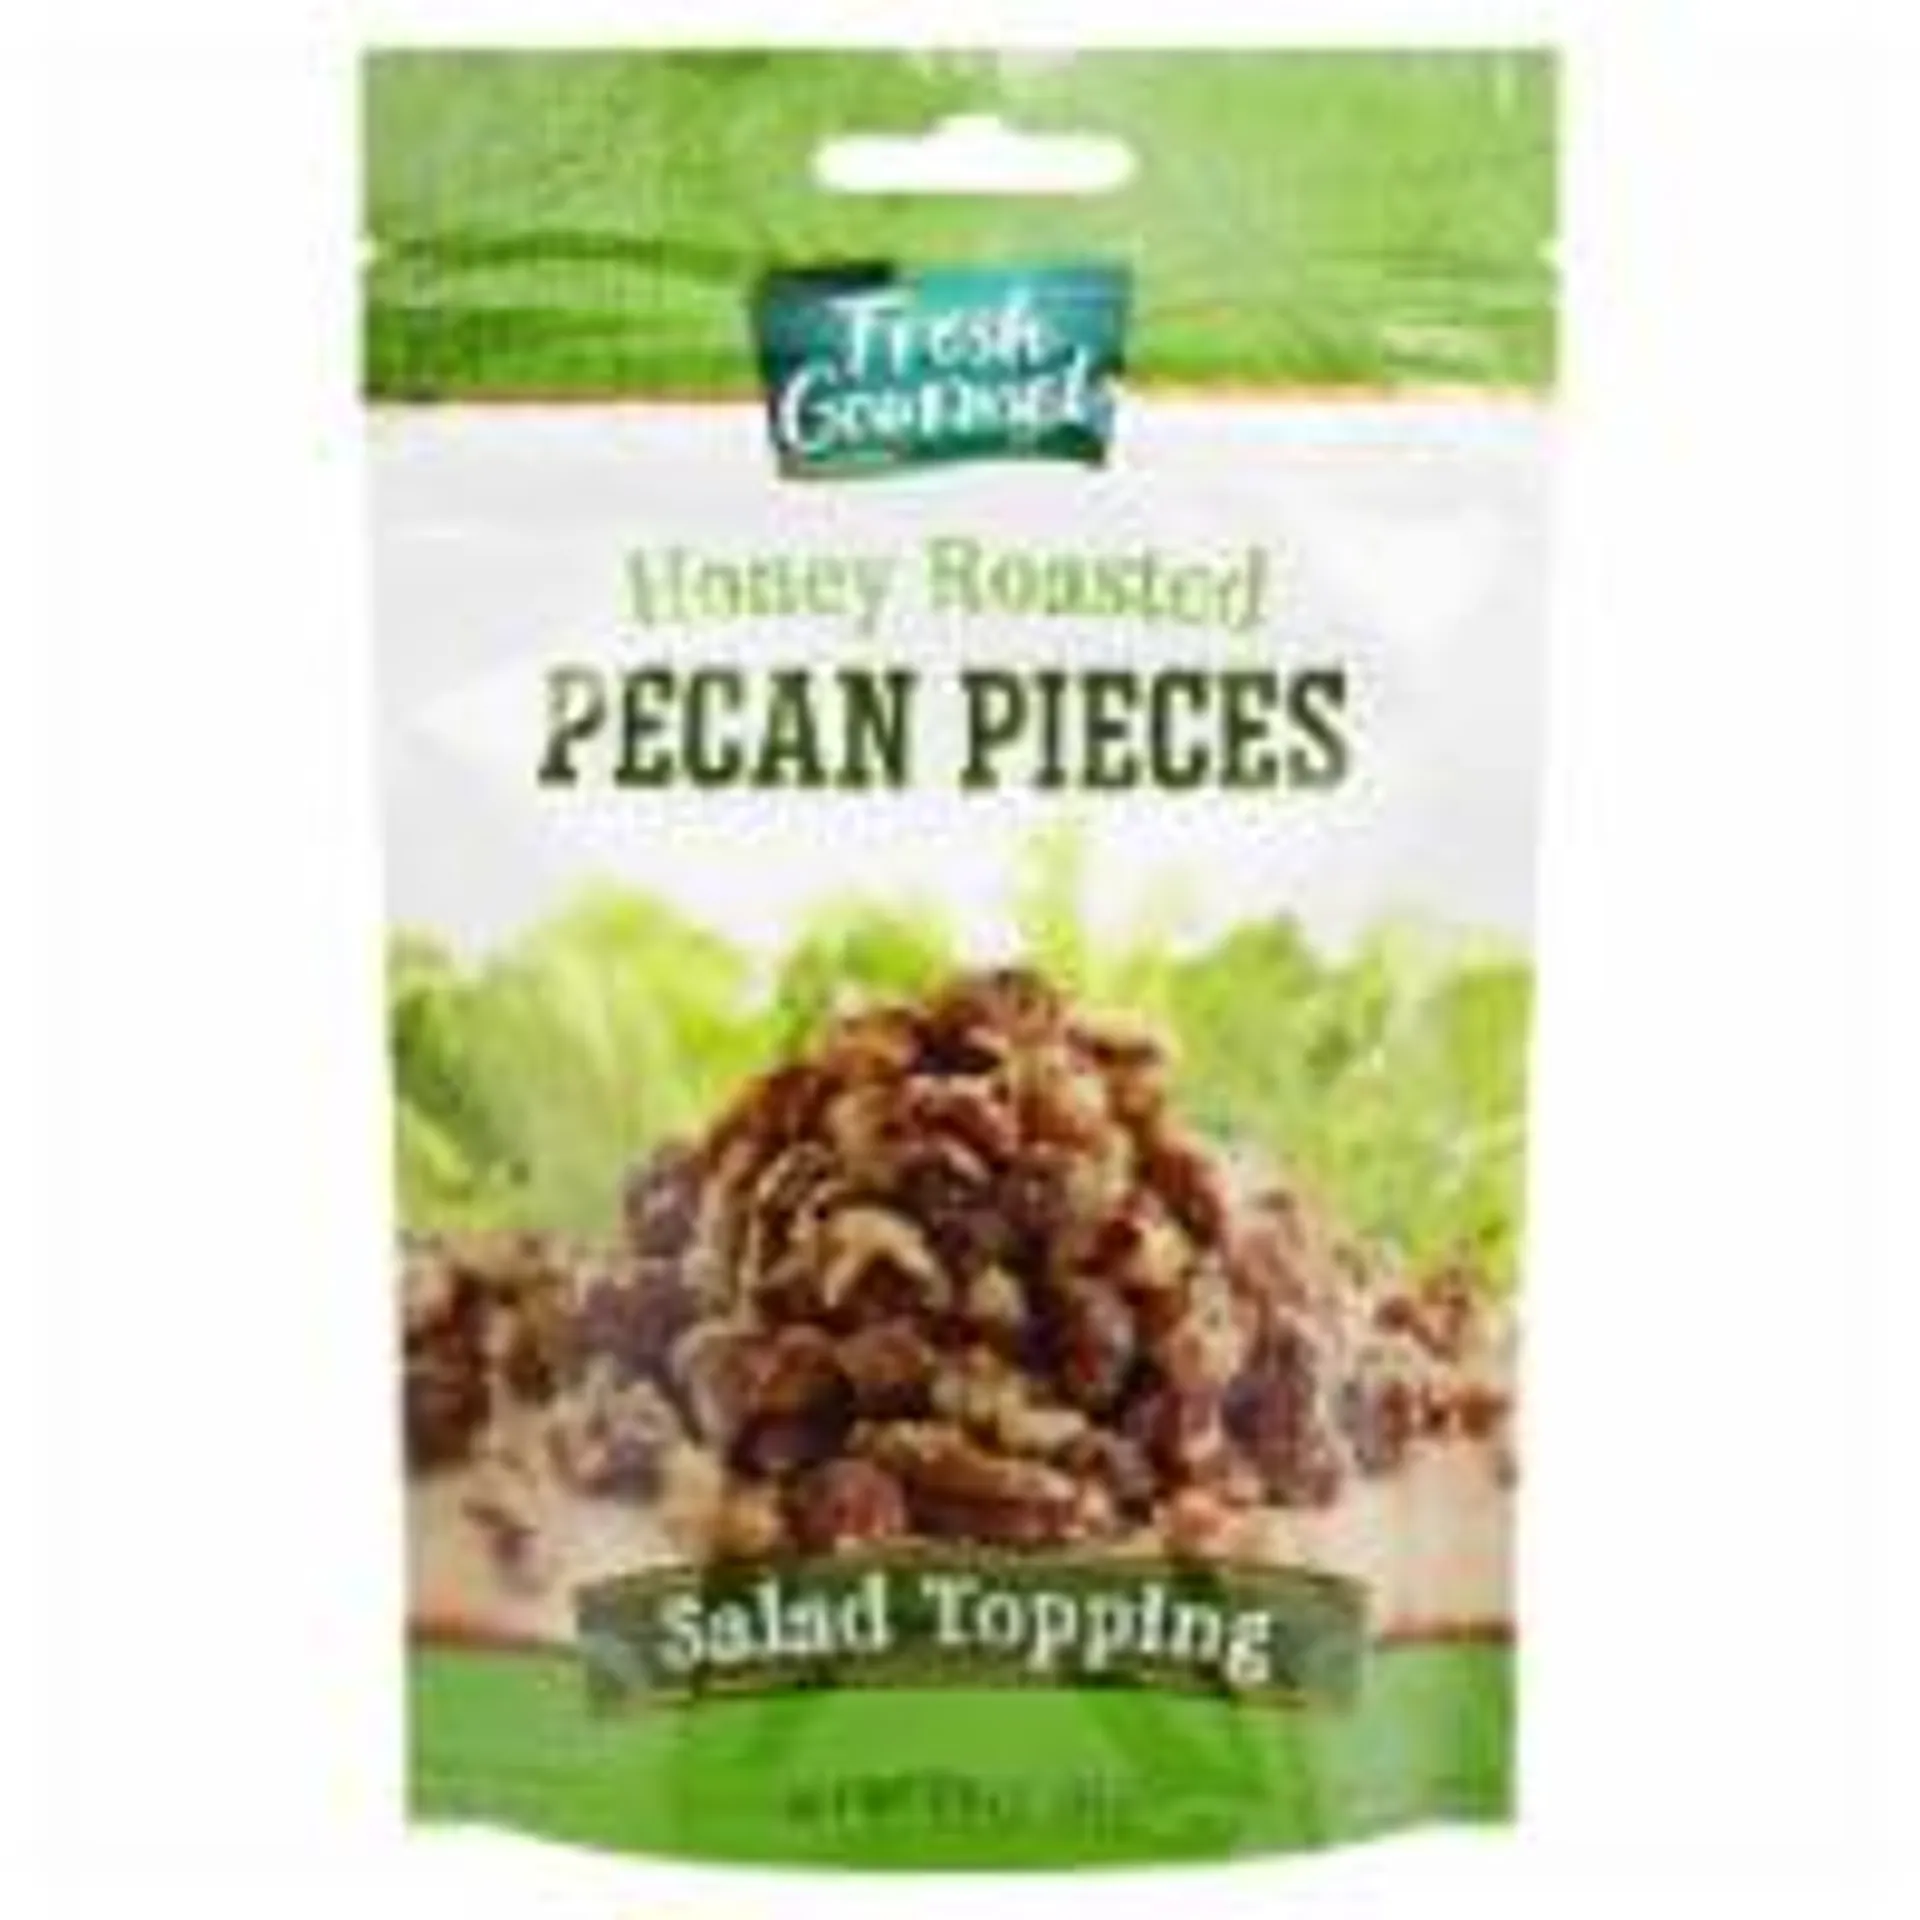 Fresh Gourmet Honey Roasted Pecan Pieces Salad Topping